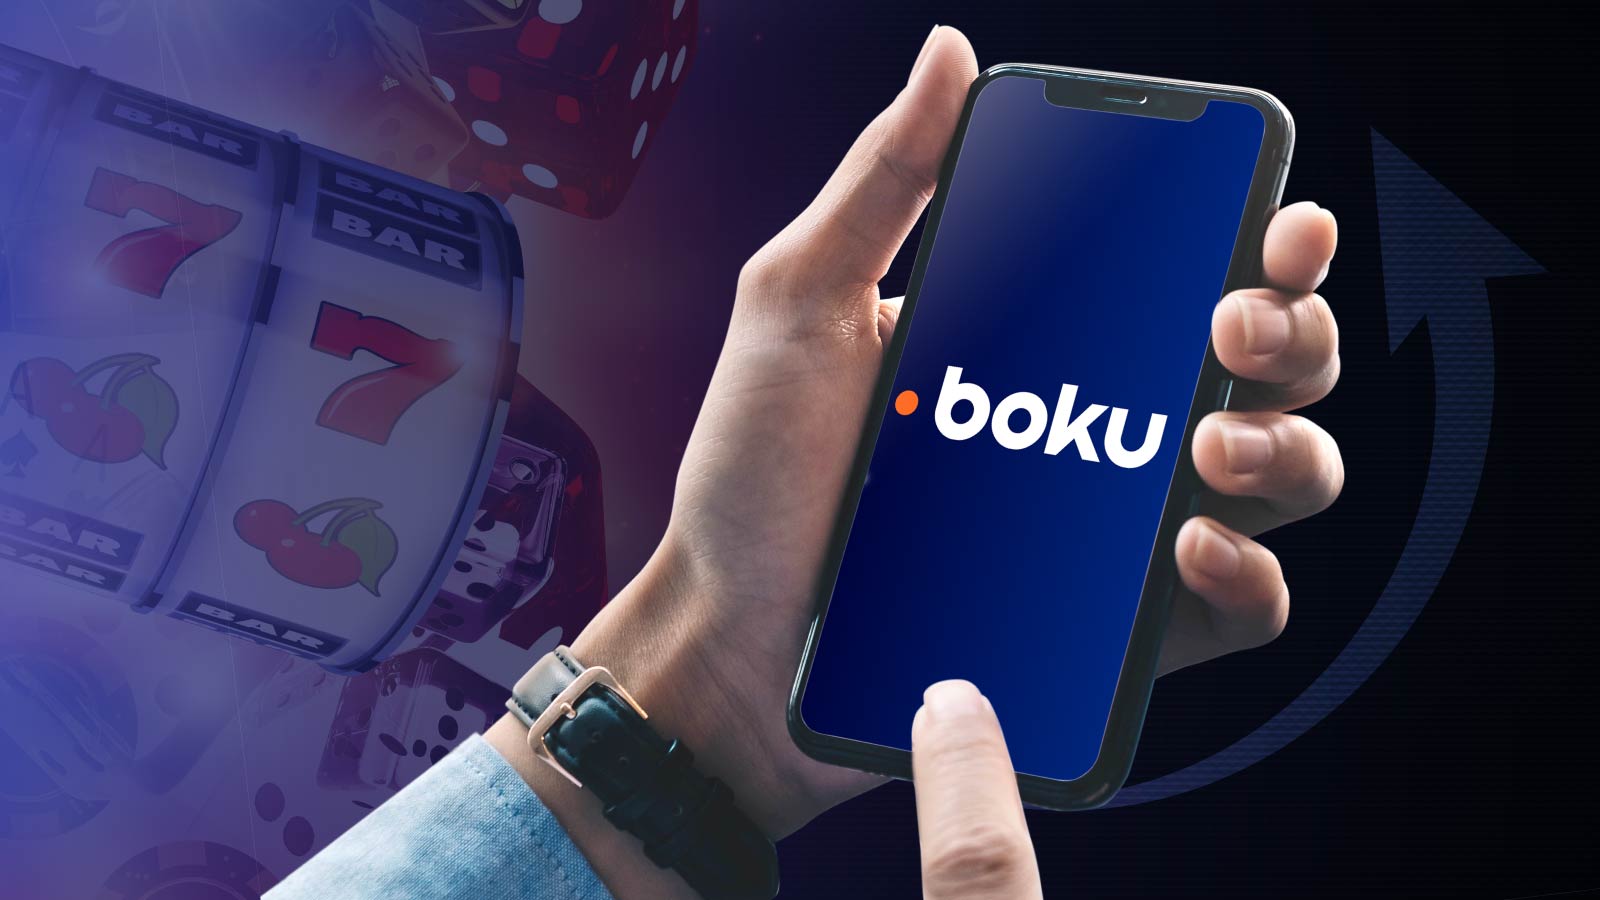 A closer look at Boku depositing What you need to know about the Boku payment method